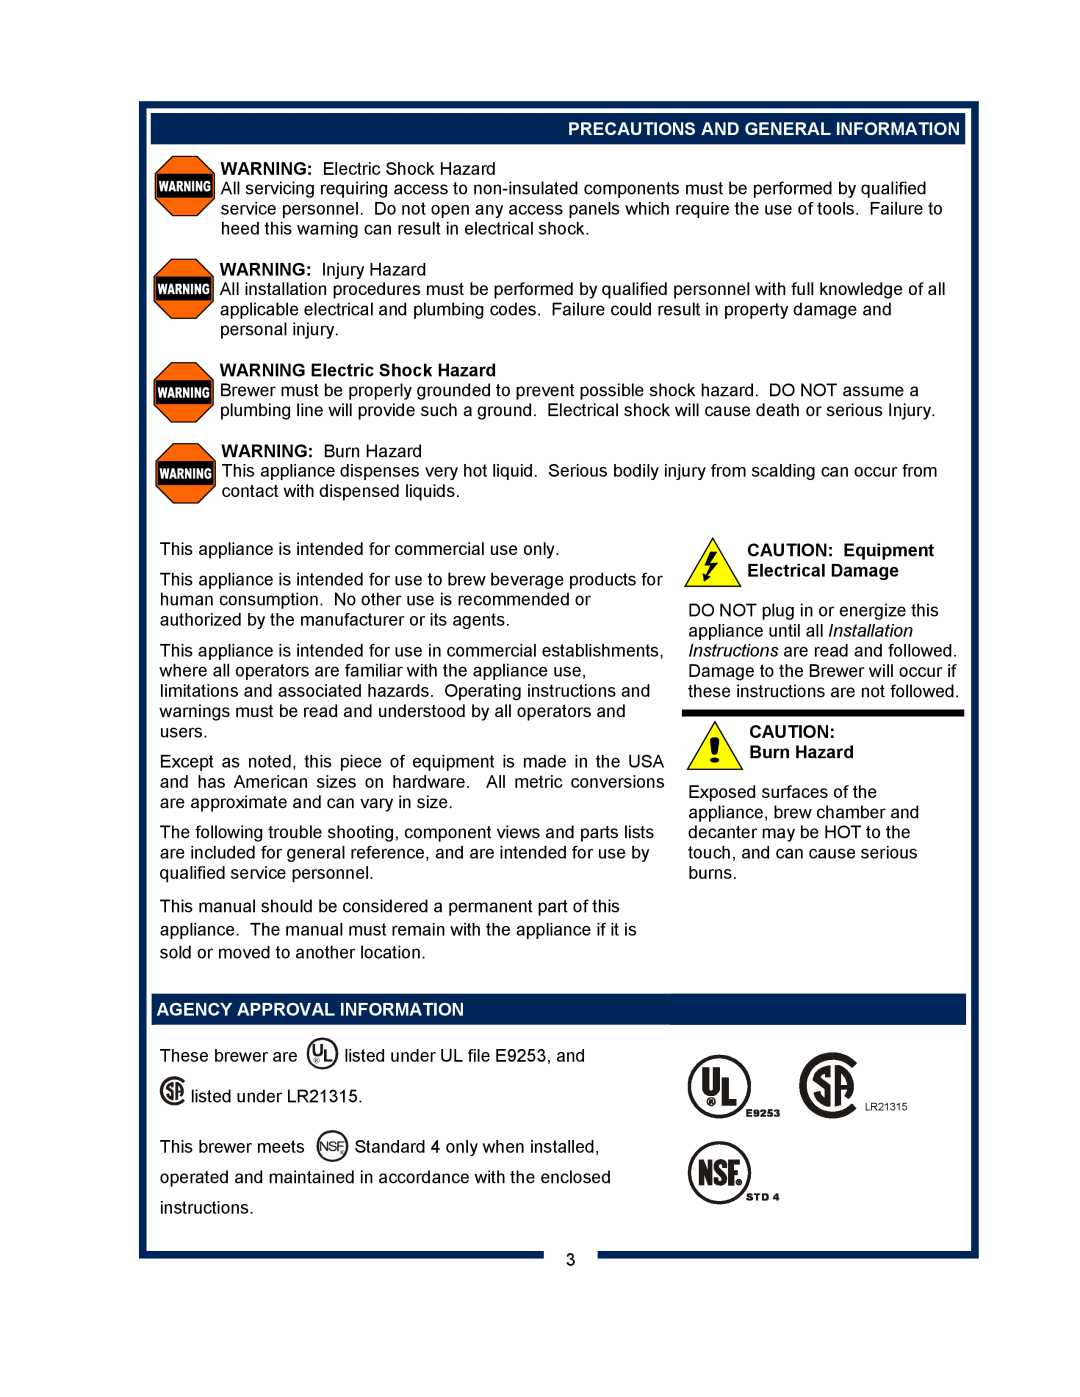 Bloomfield 8571 Precautions And General Information, WARNING Electric Shock Hazard, CAUTION Equipment Electrical Damage 